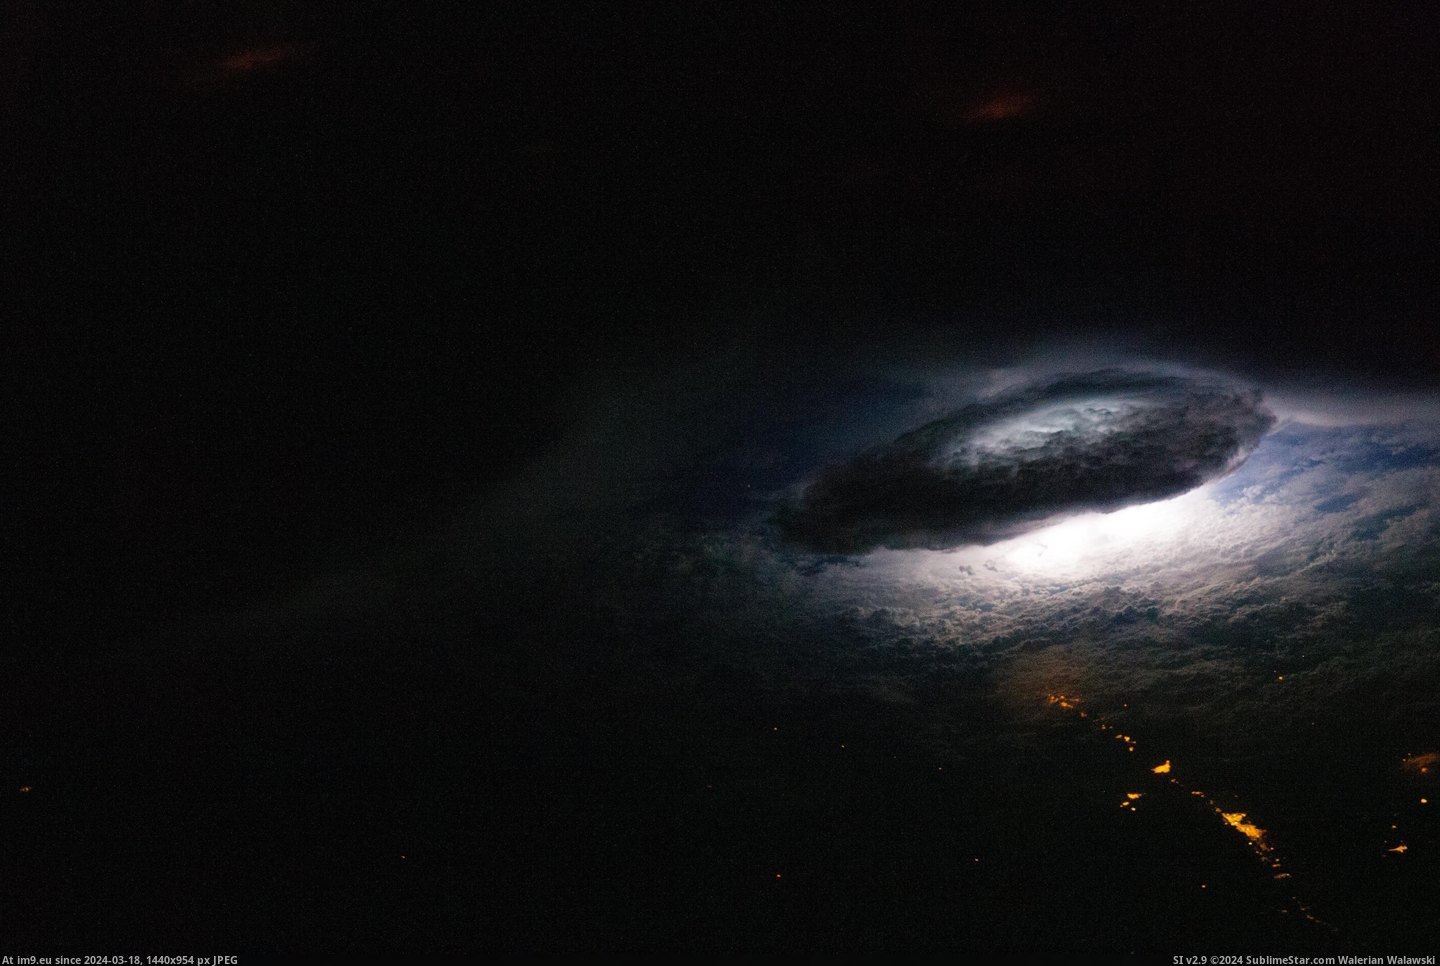 #Space #Nighttime #Thunderstorm [Pics] This is what a nighttime thunderstorm looks like from space Pic. (Изображение из альбом My r/PICS favs))